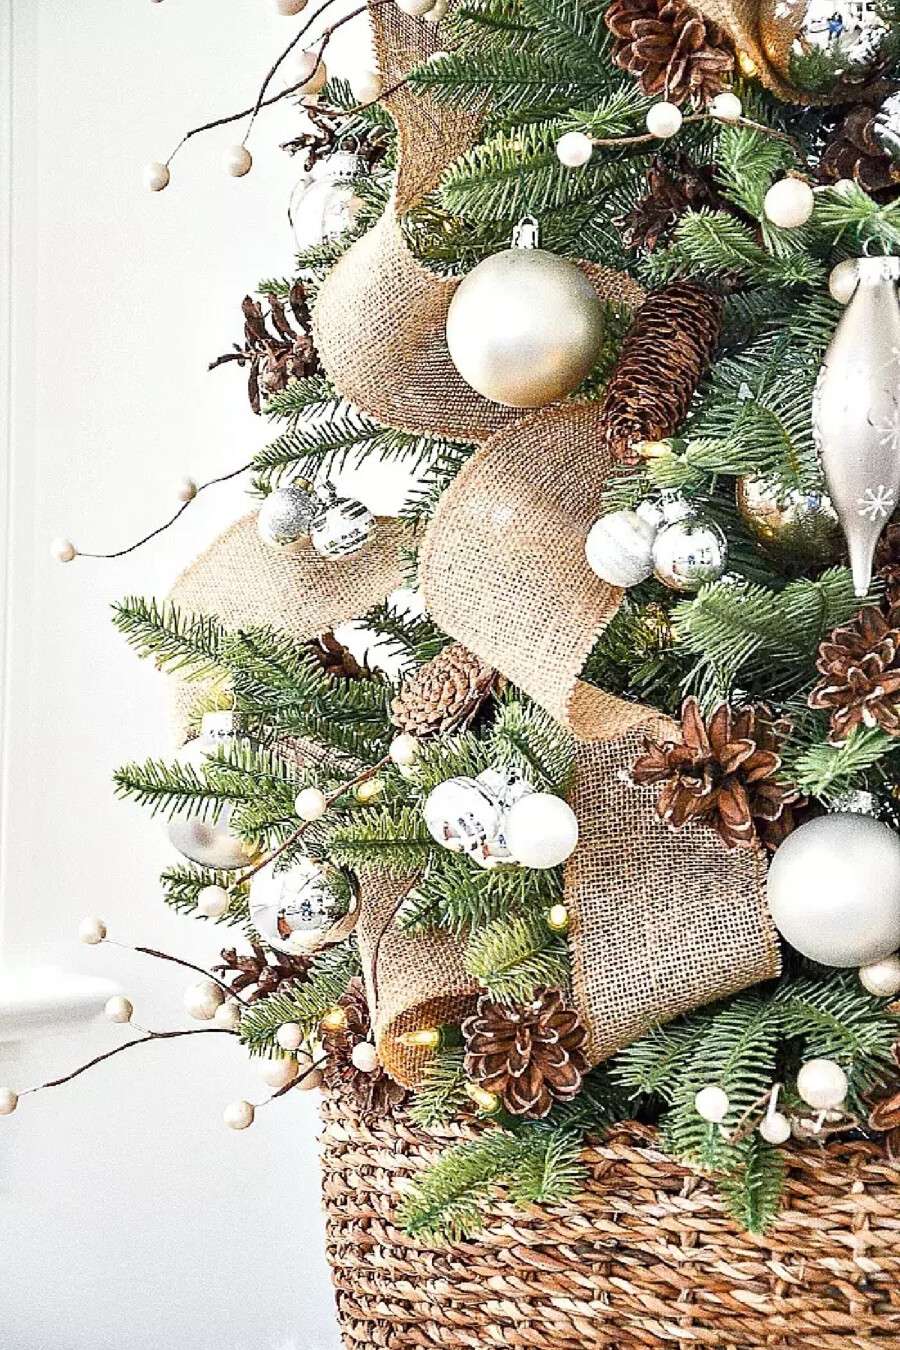 Decorating With Pinecones At Christmas